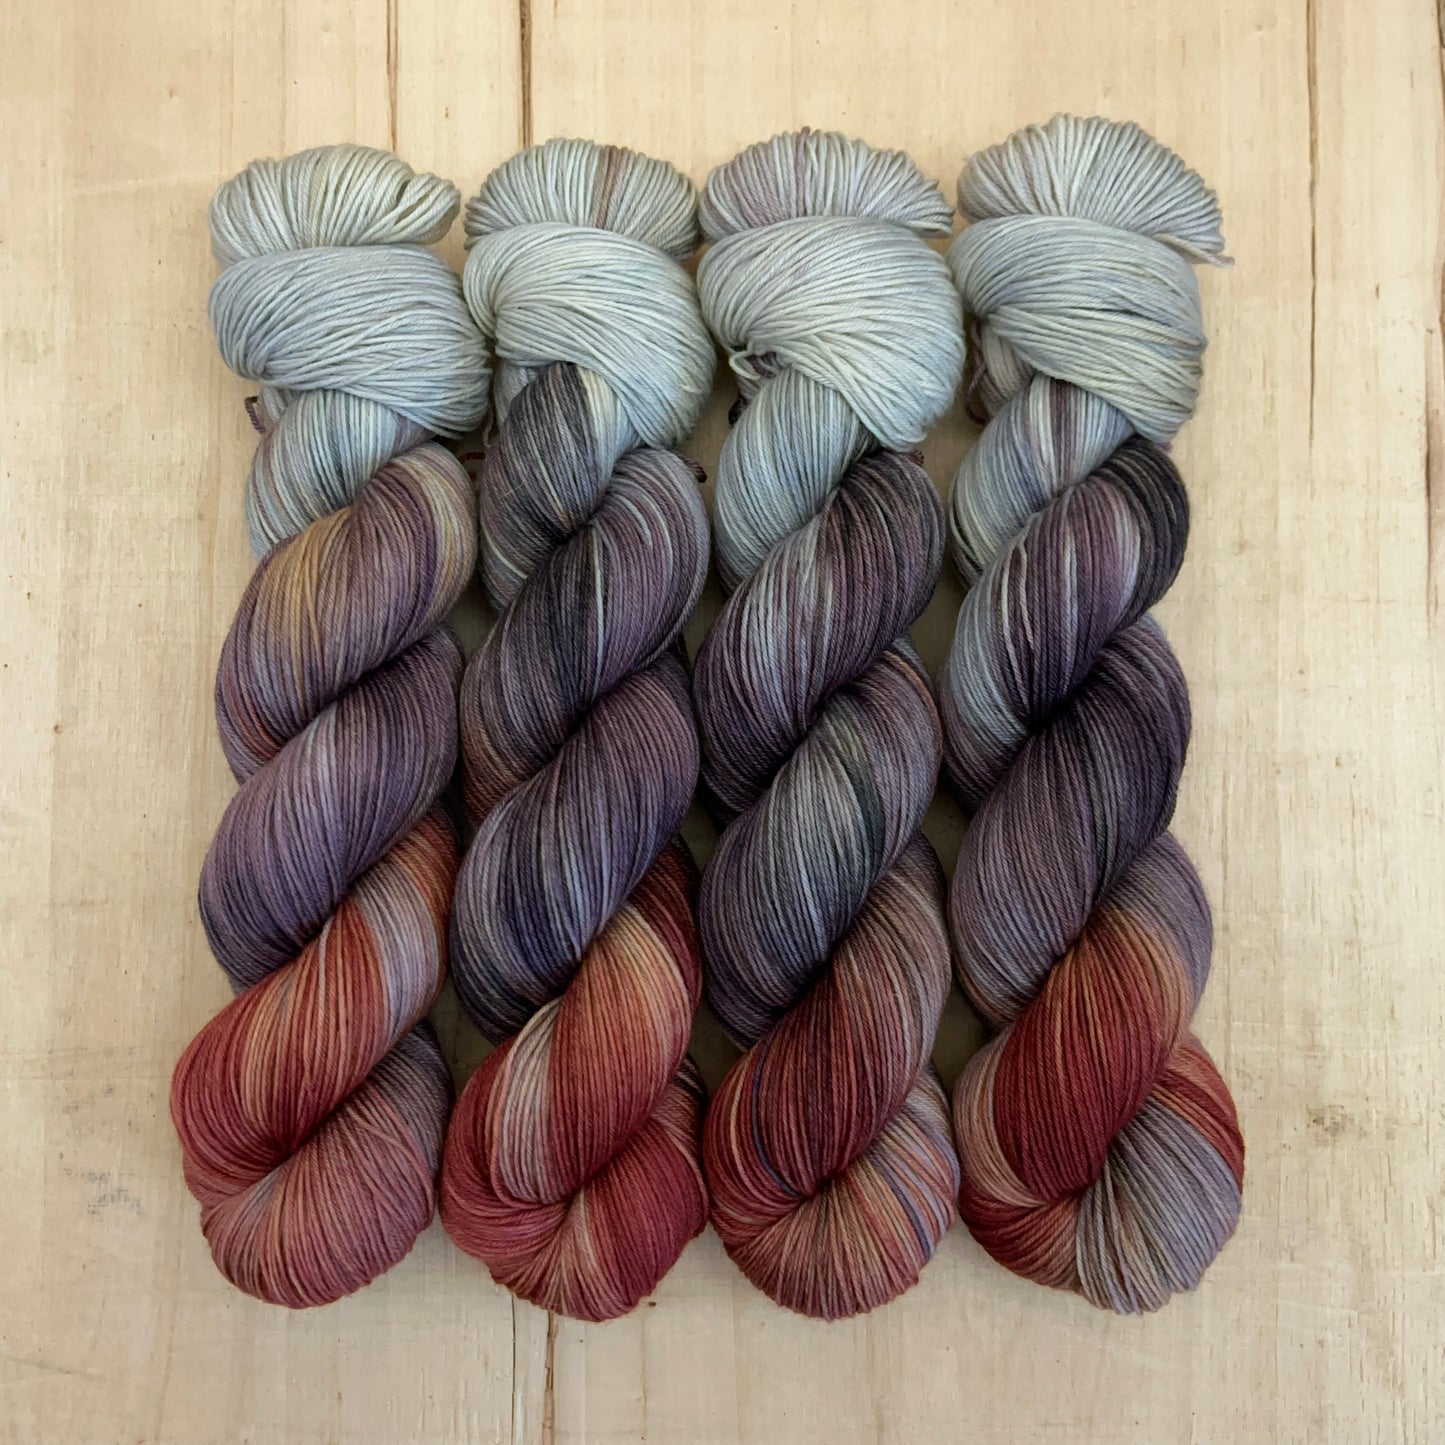 yarn from the meadow - january